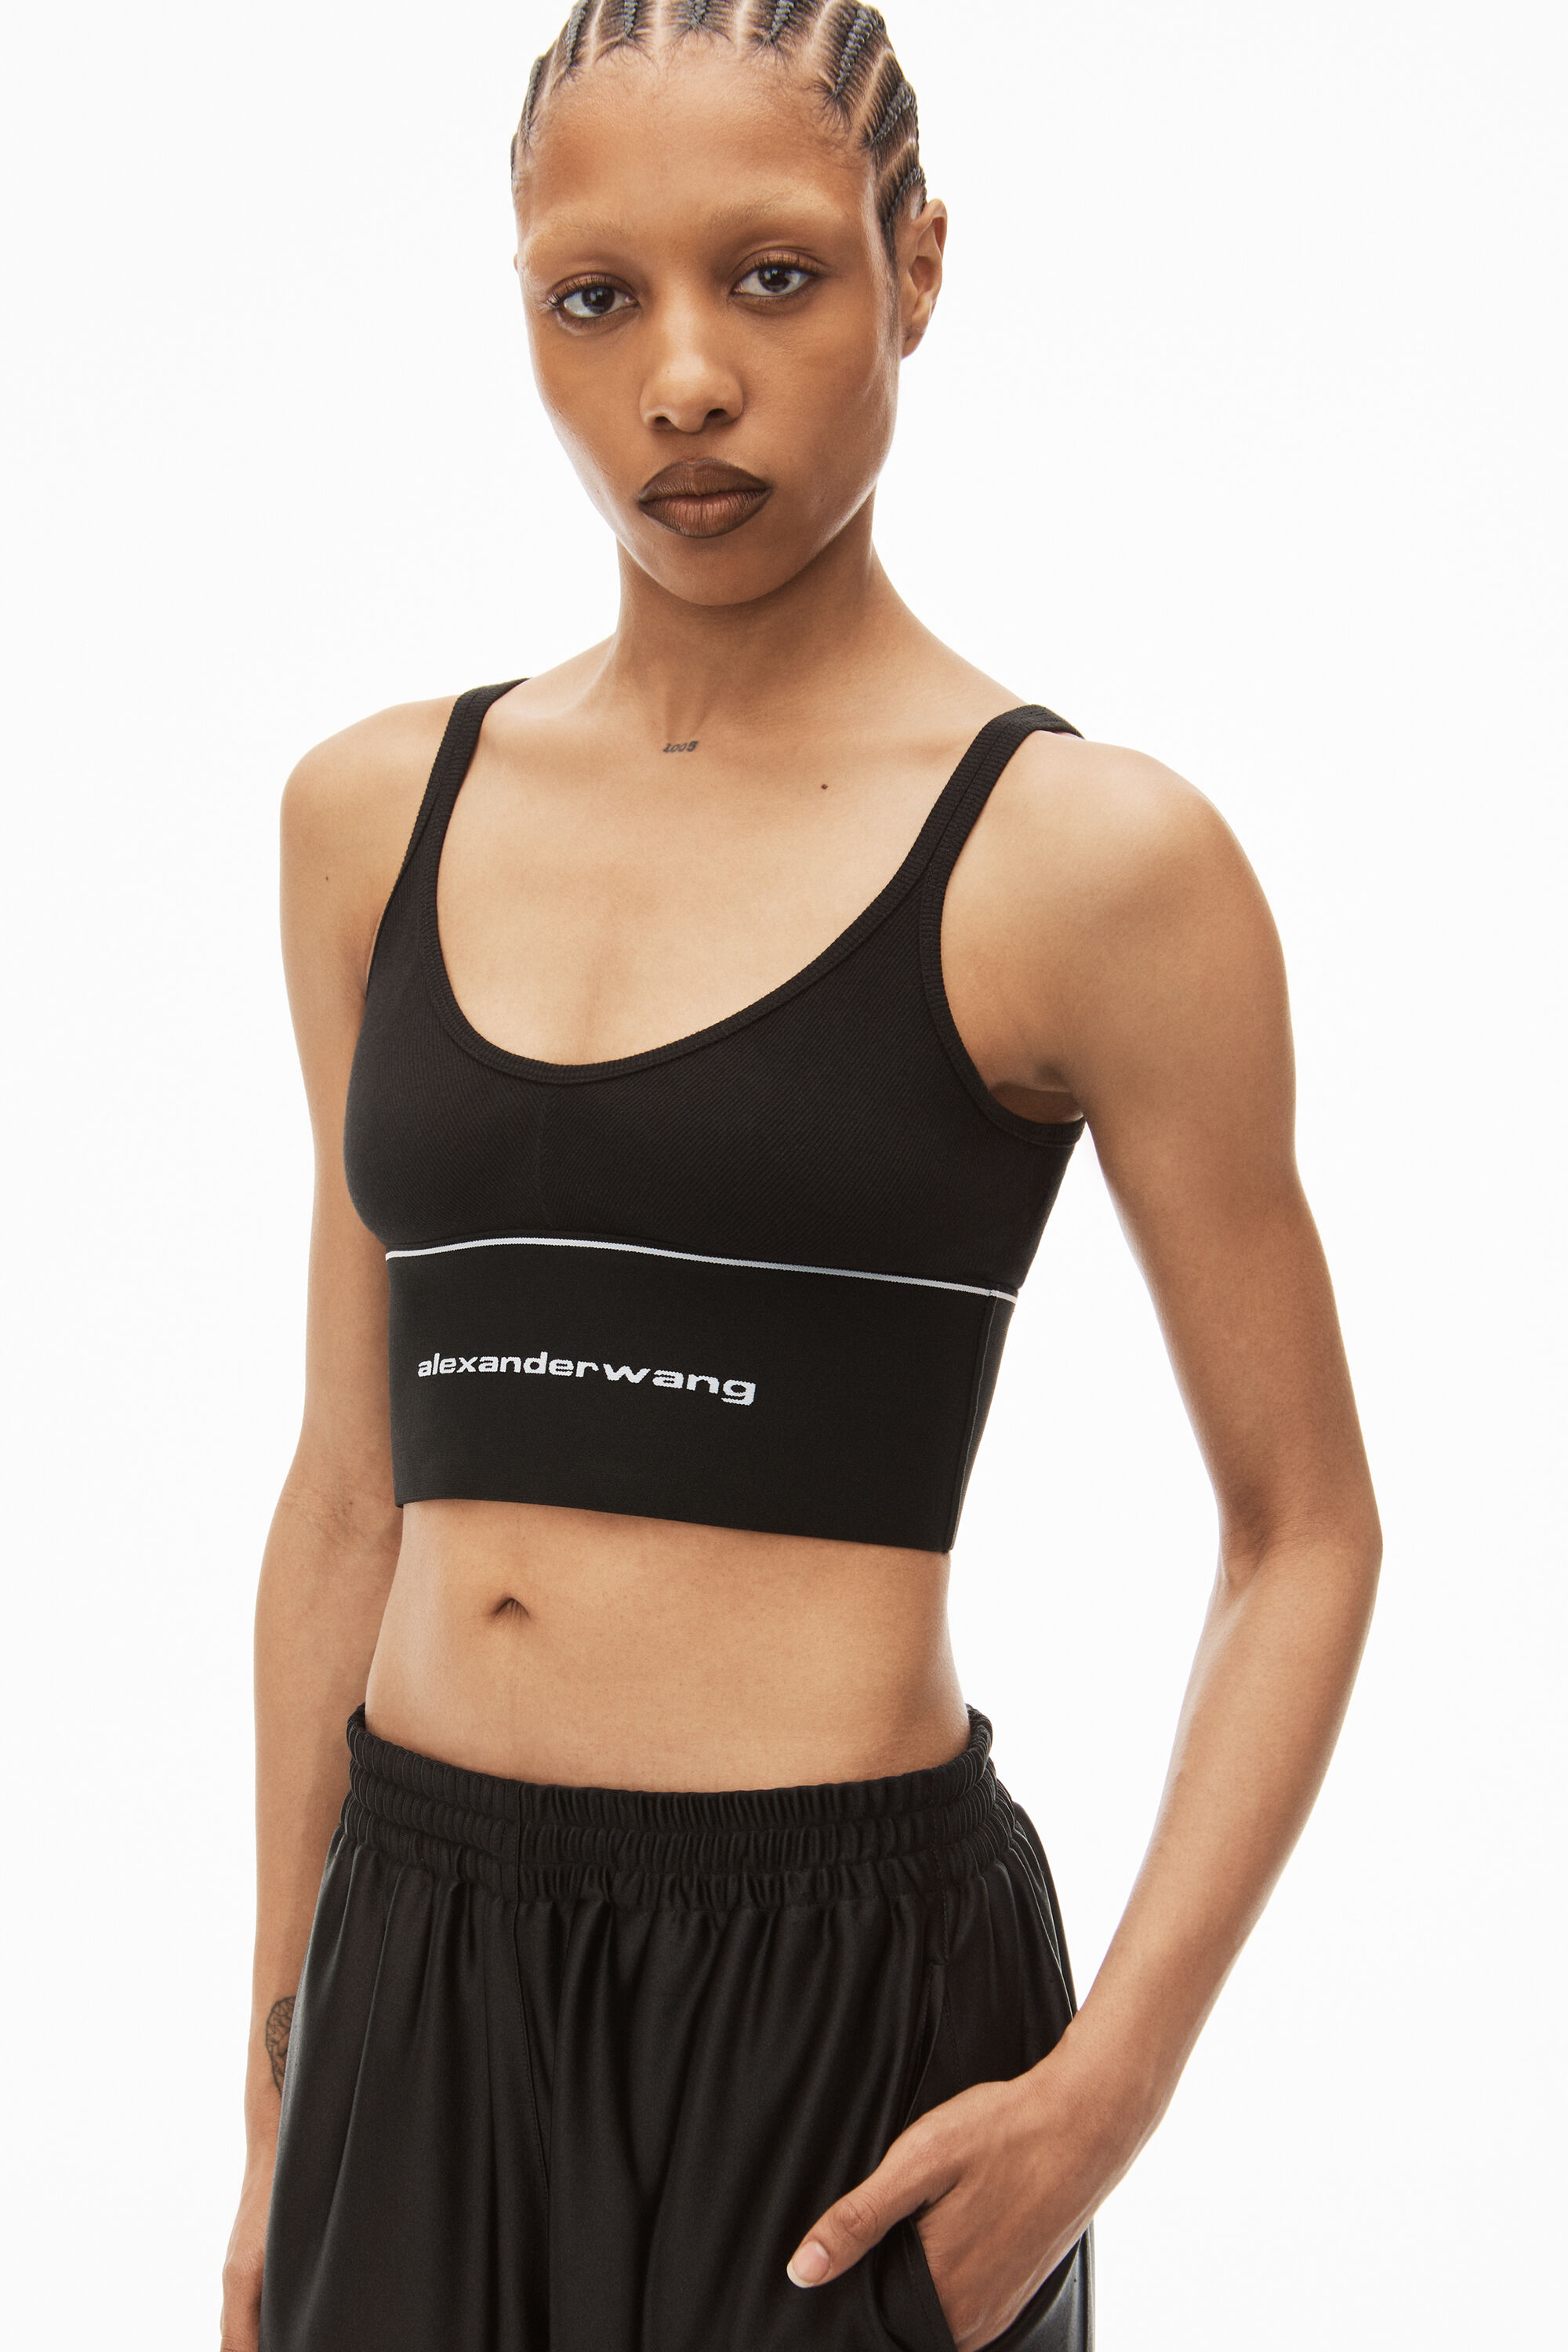 Projects | alexanderwang® US Official Site